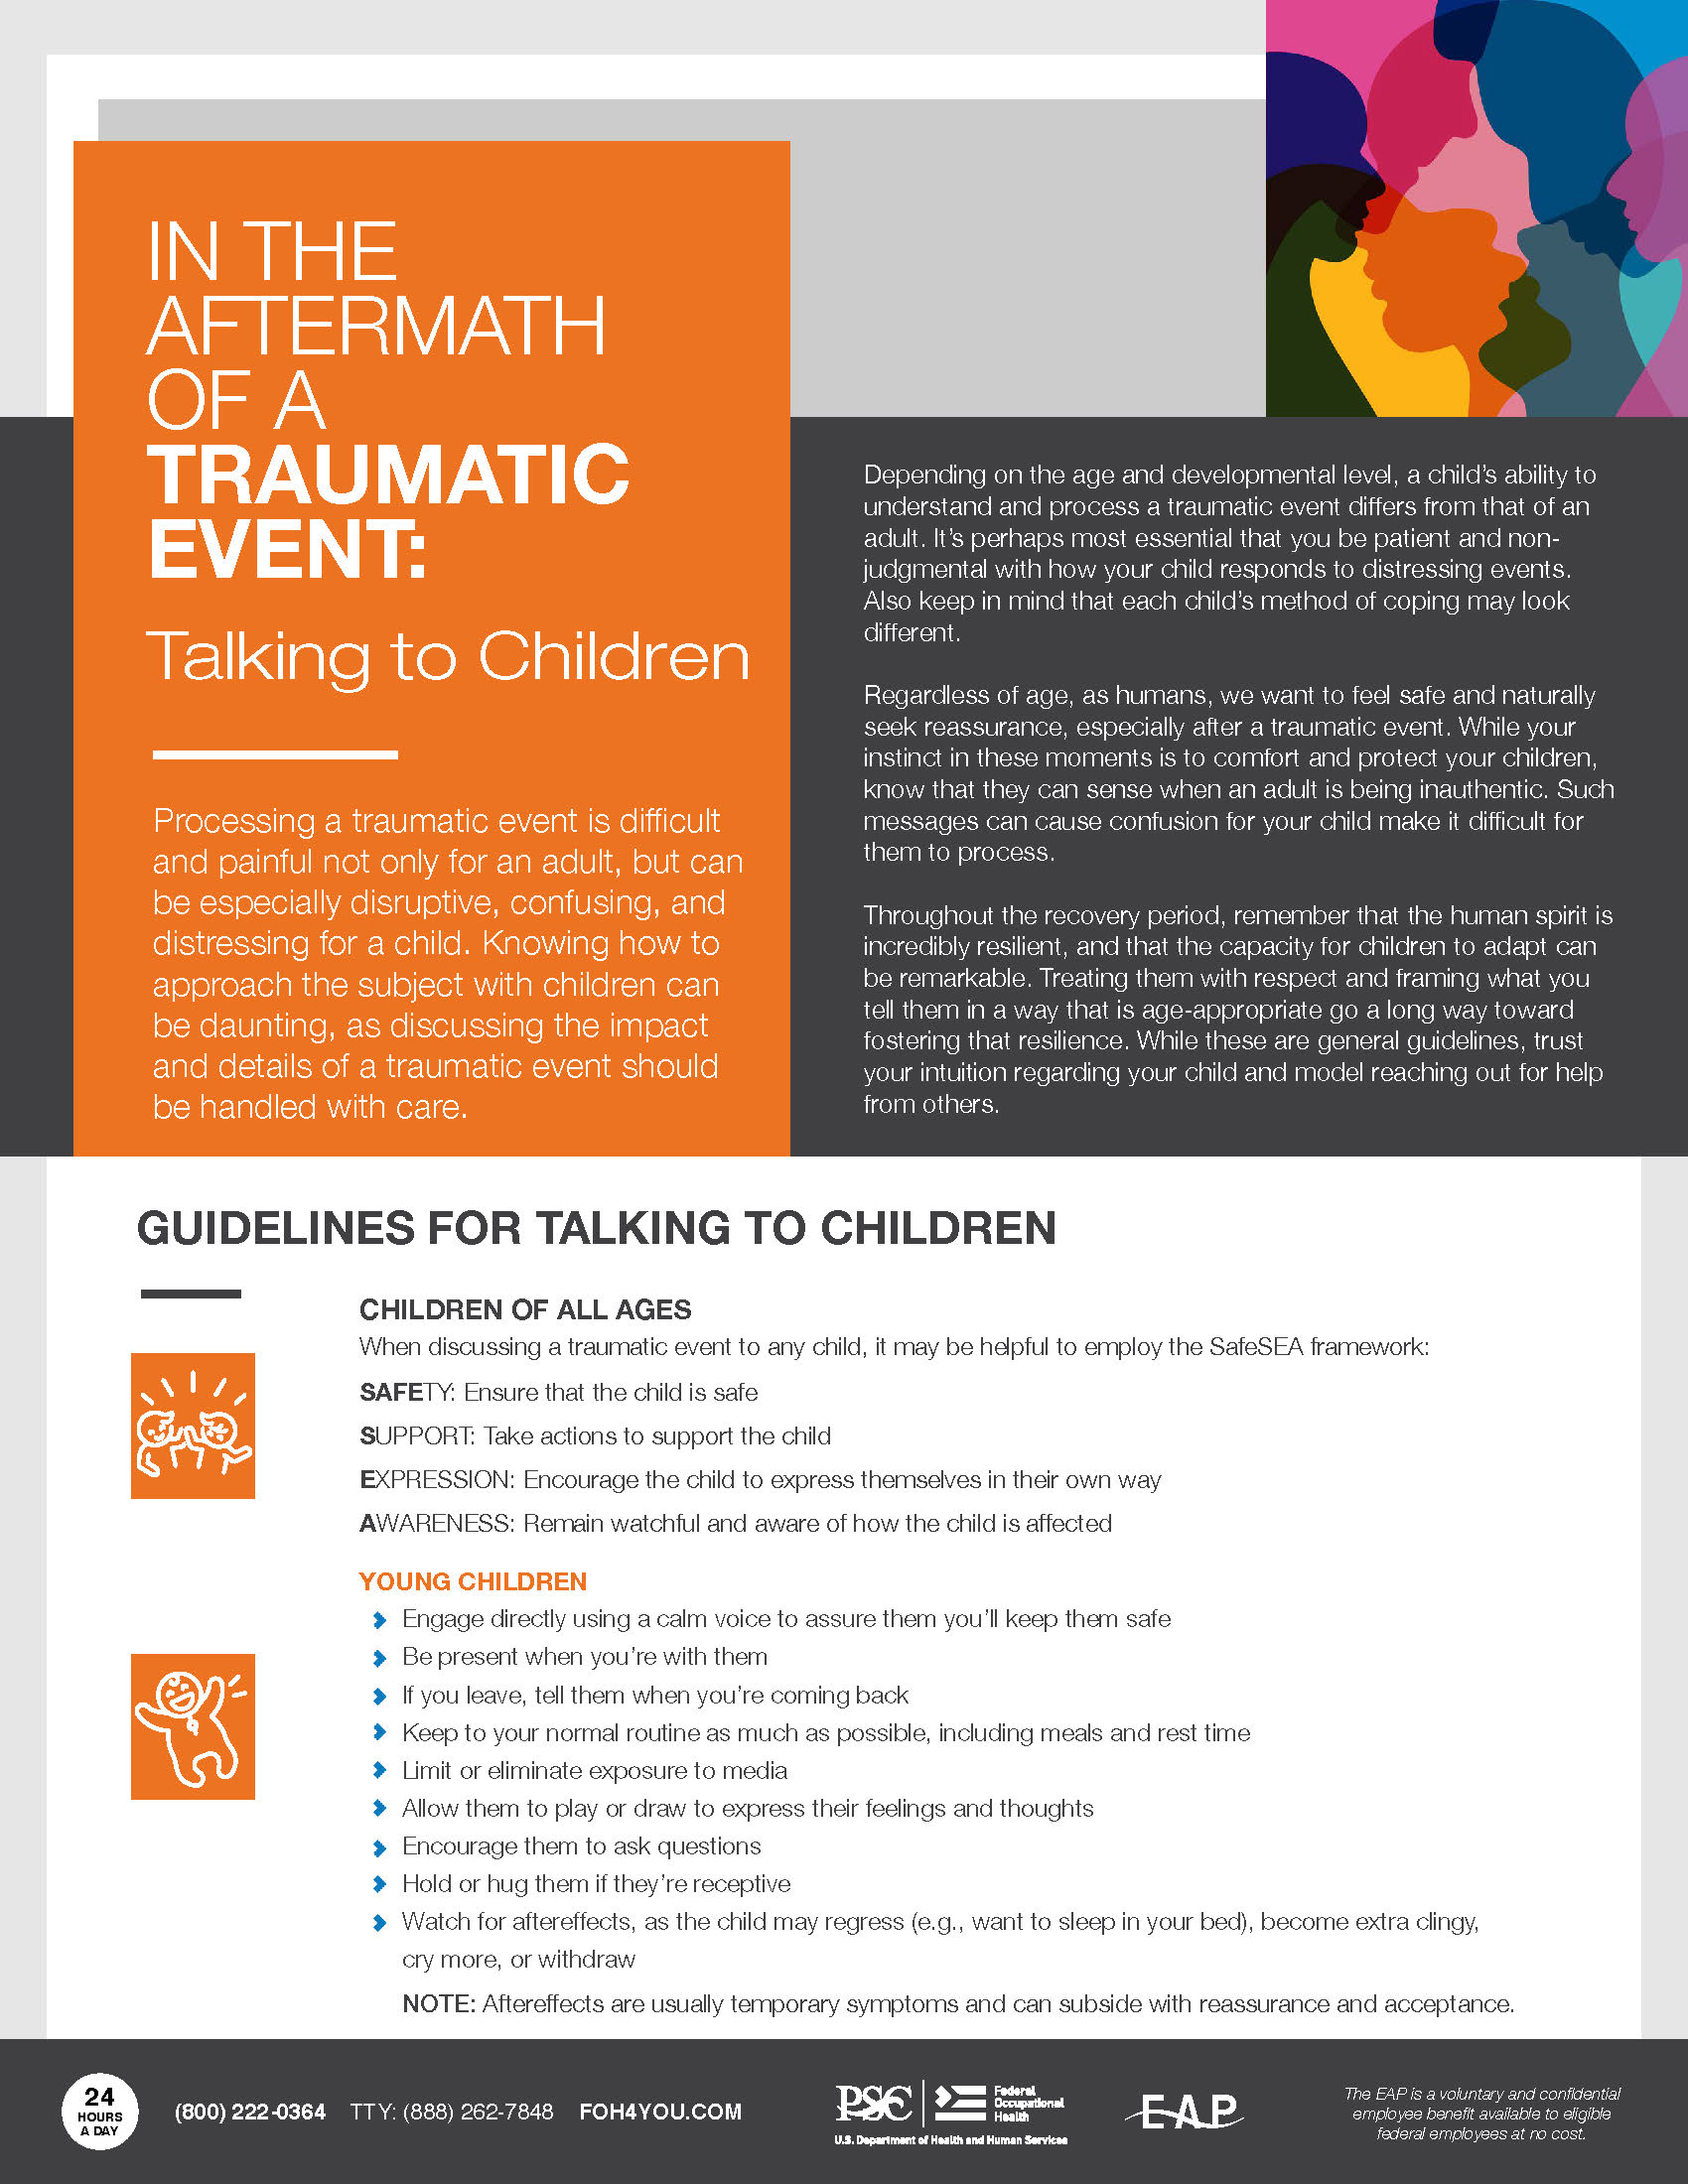 In the Aftermath of a Traumatic Event - Talking to Children